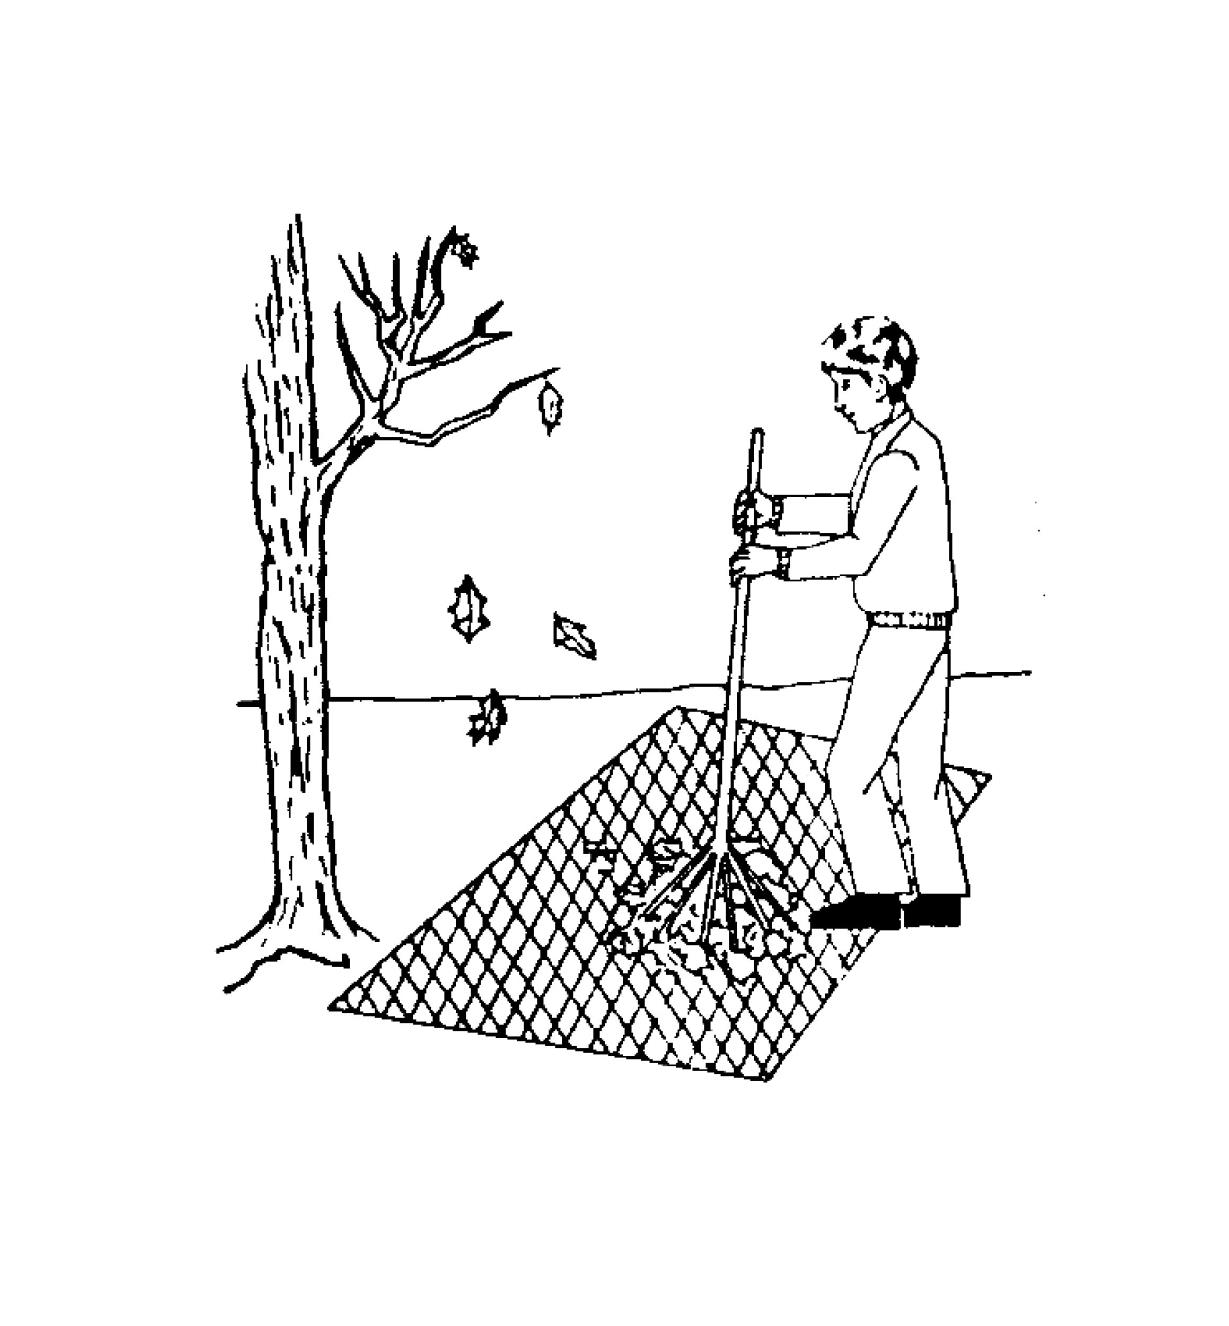 Illustrated example of a man raking leaves onto a section of garden netting